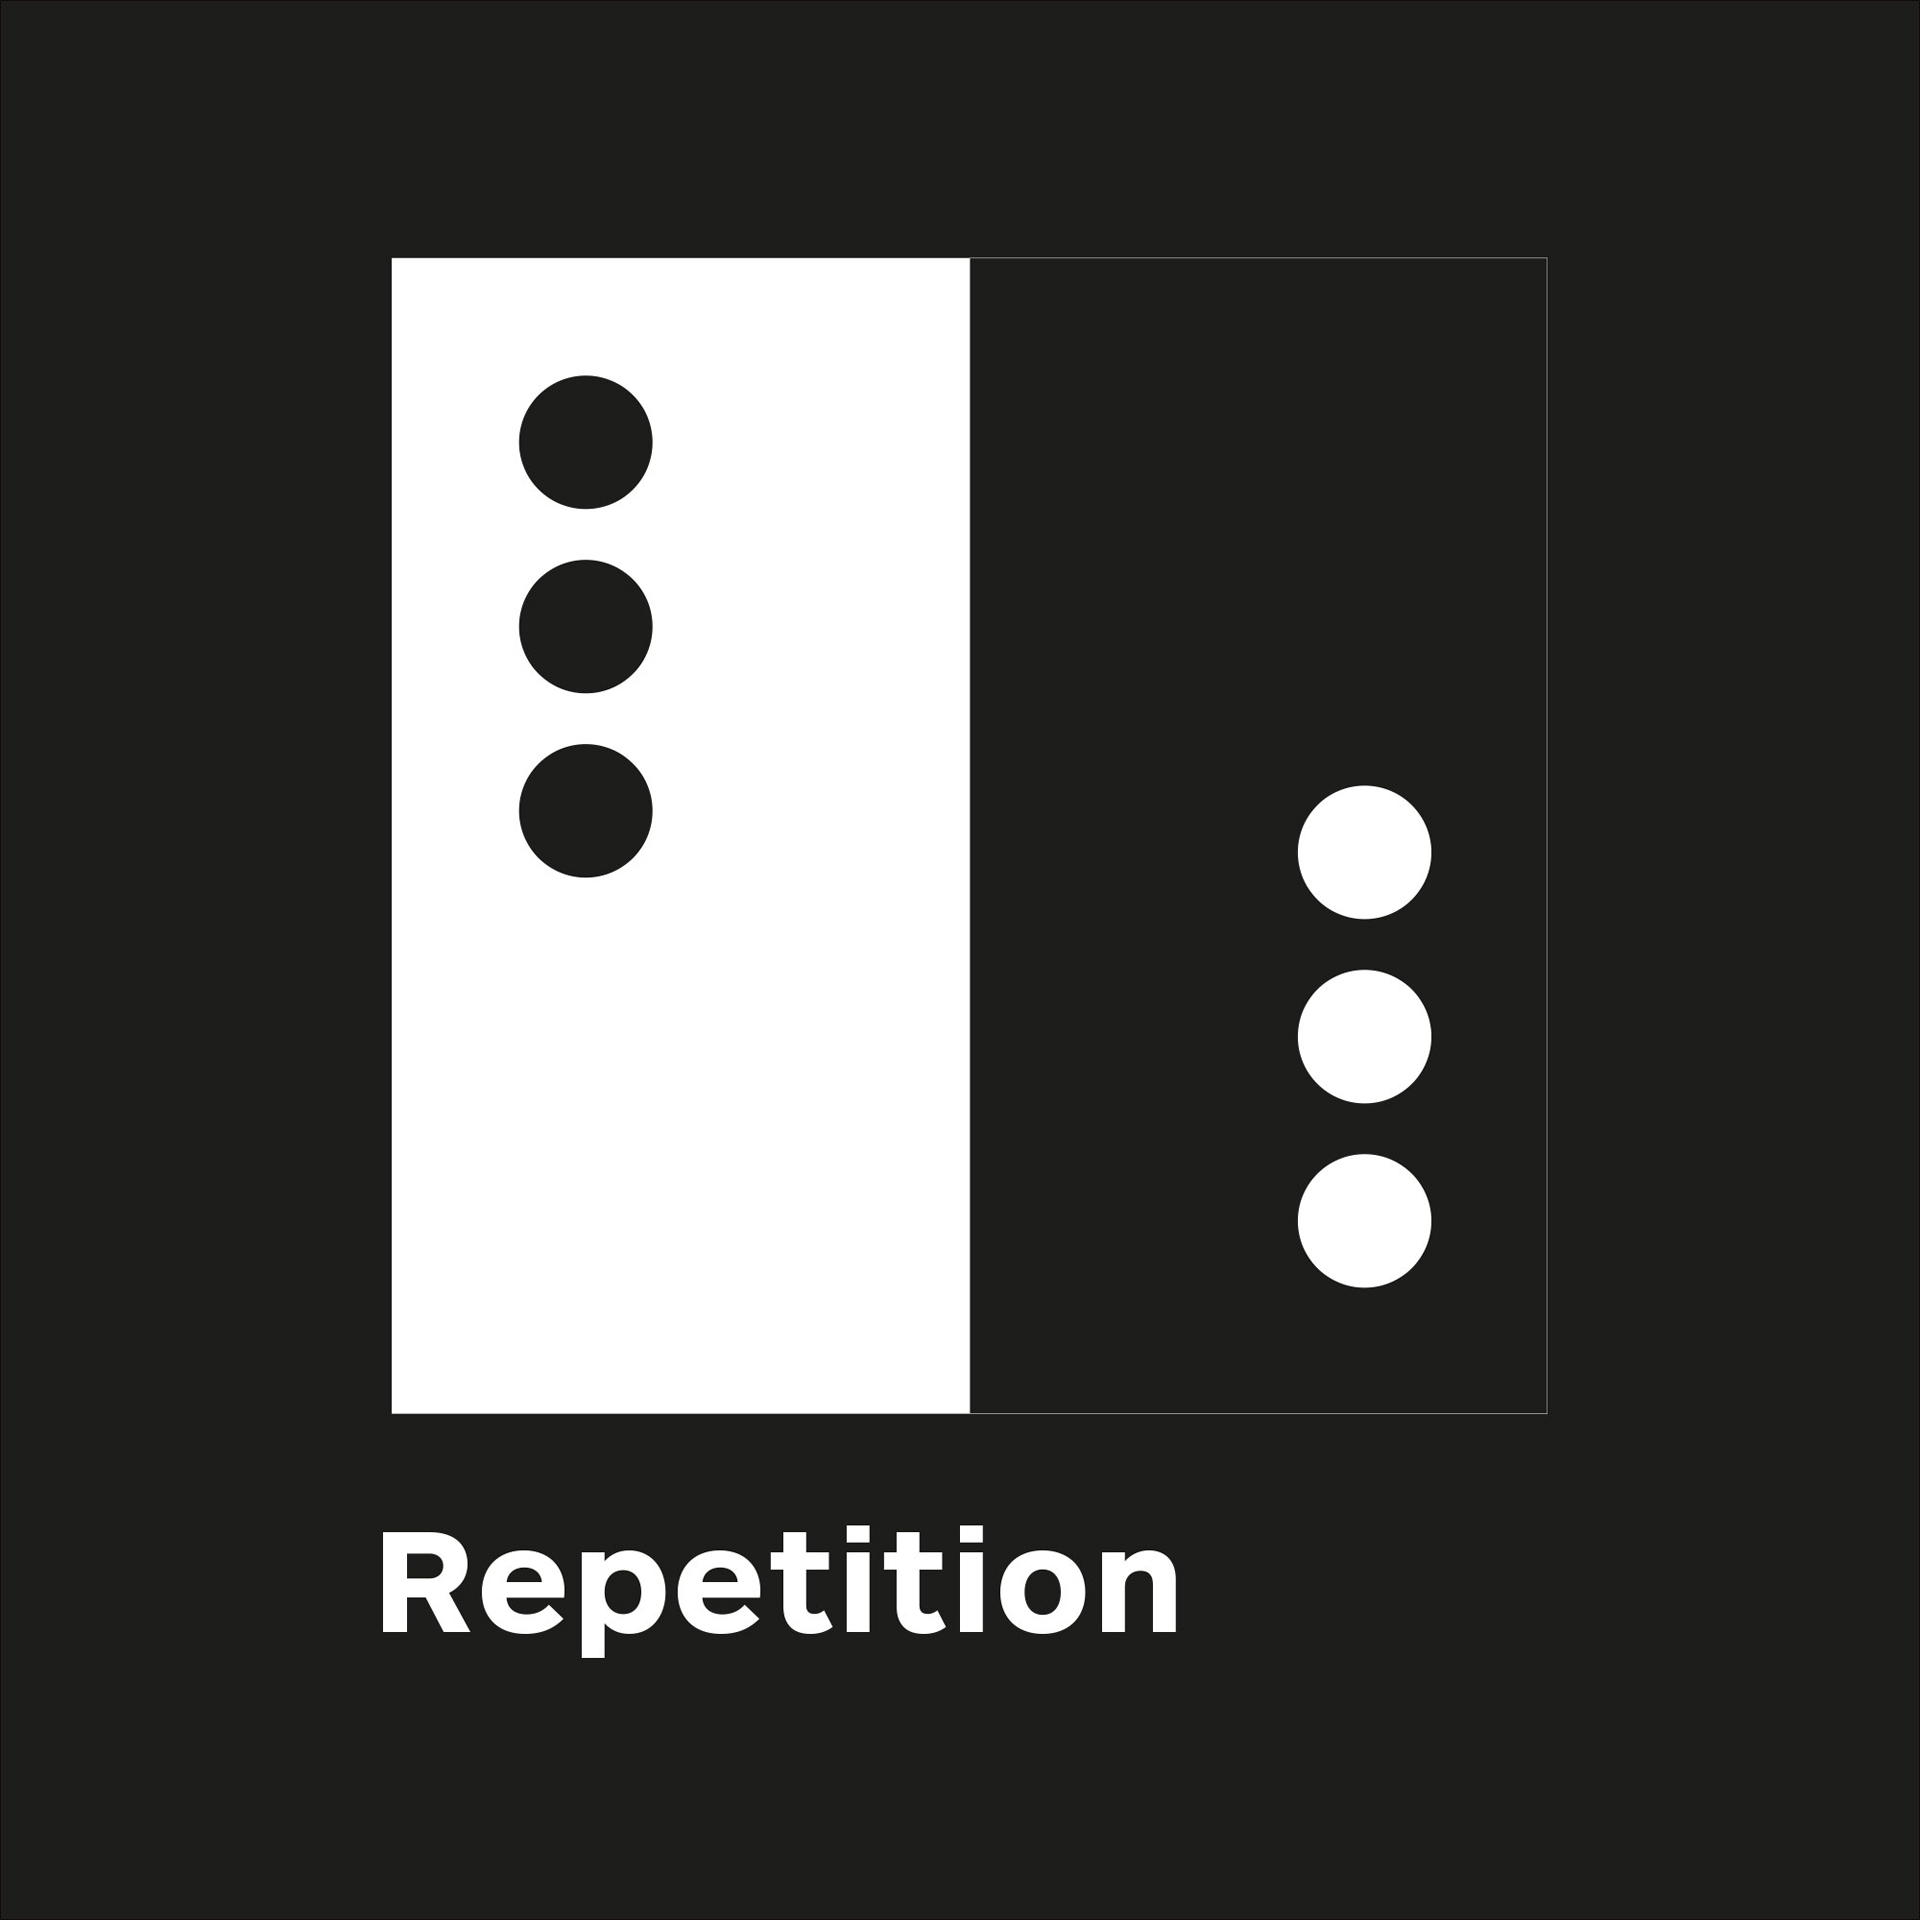 Illustration of the repetition principle in graphic design